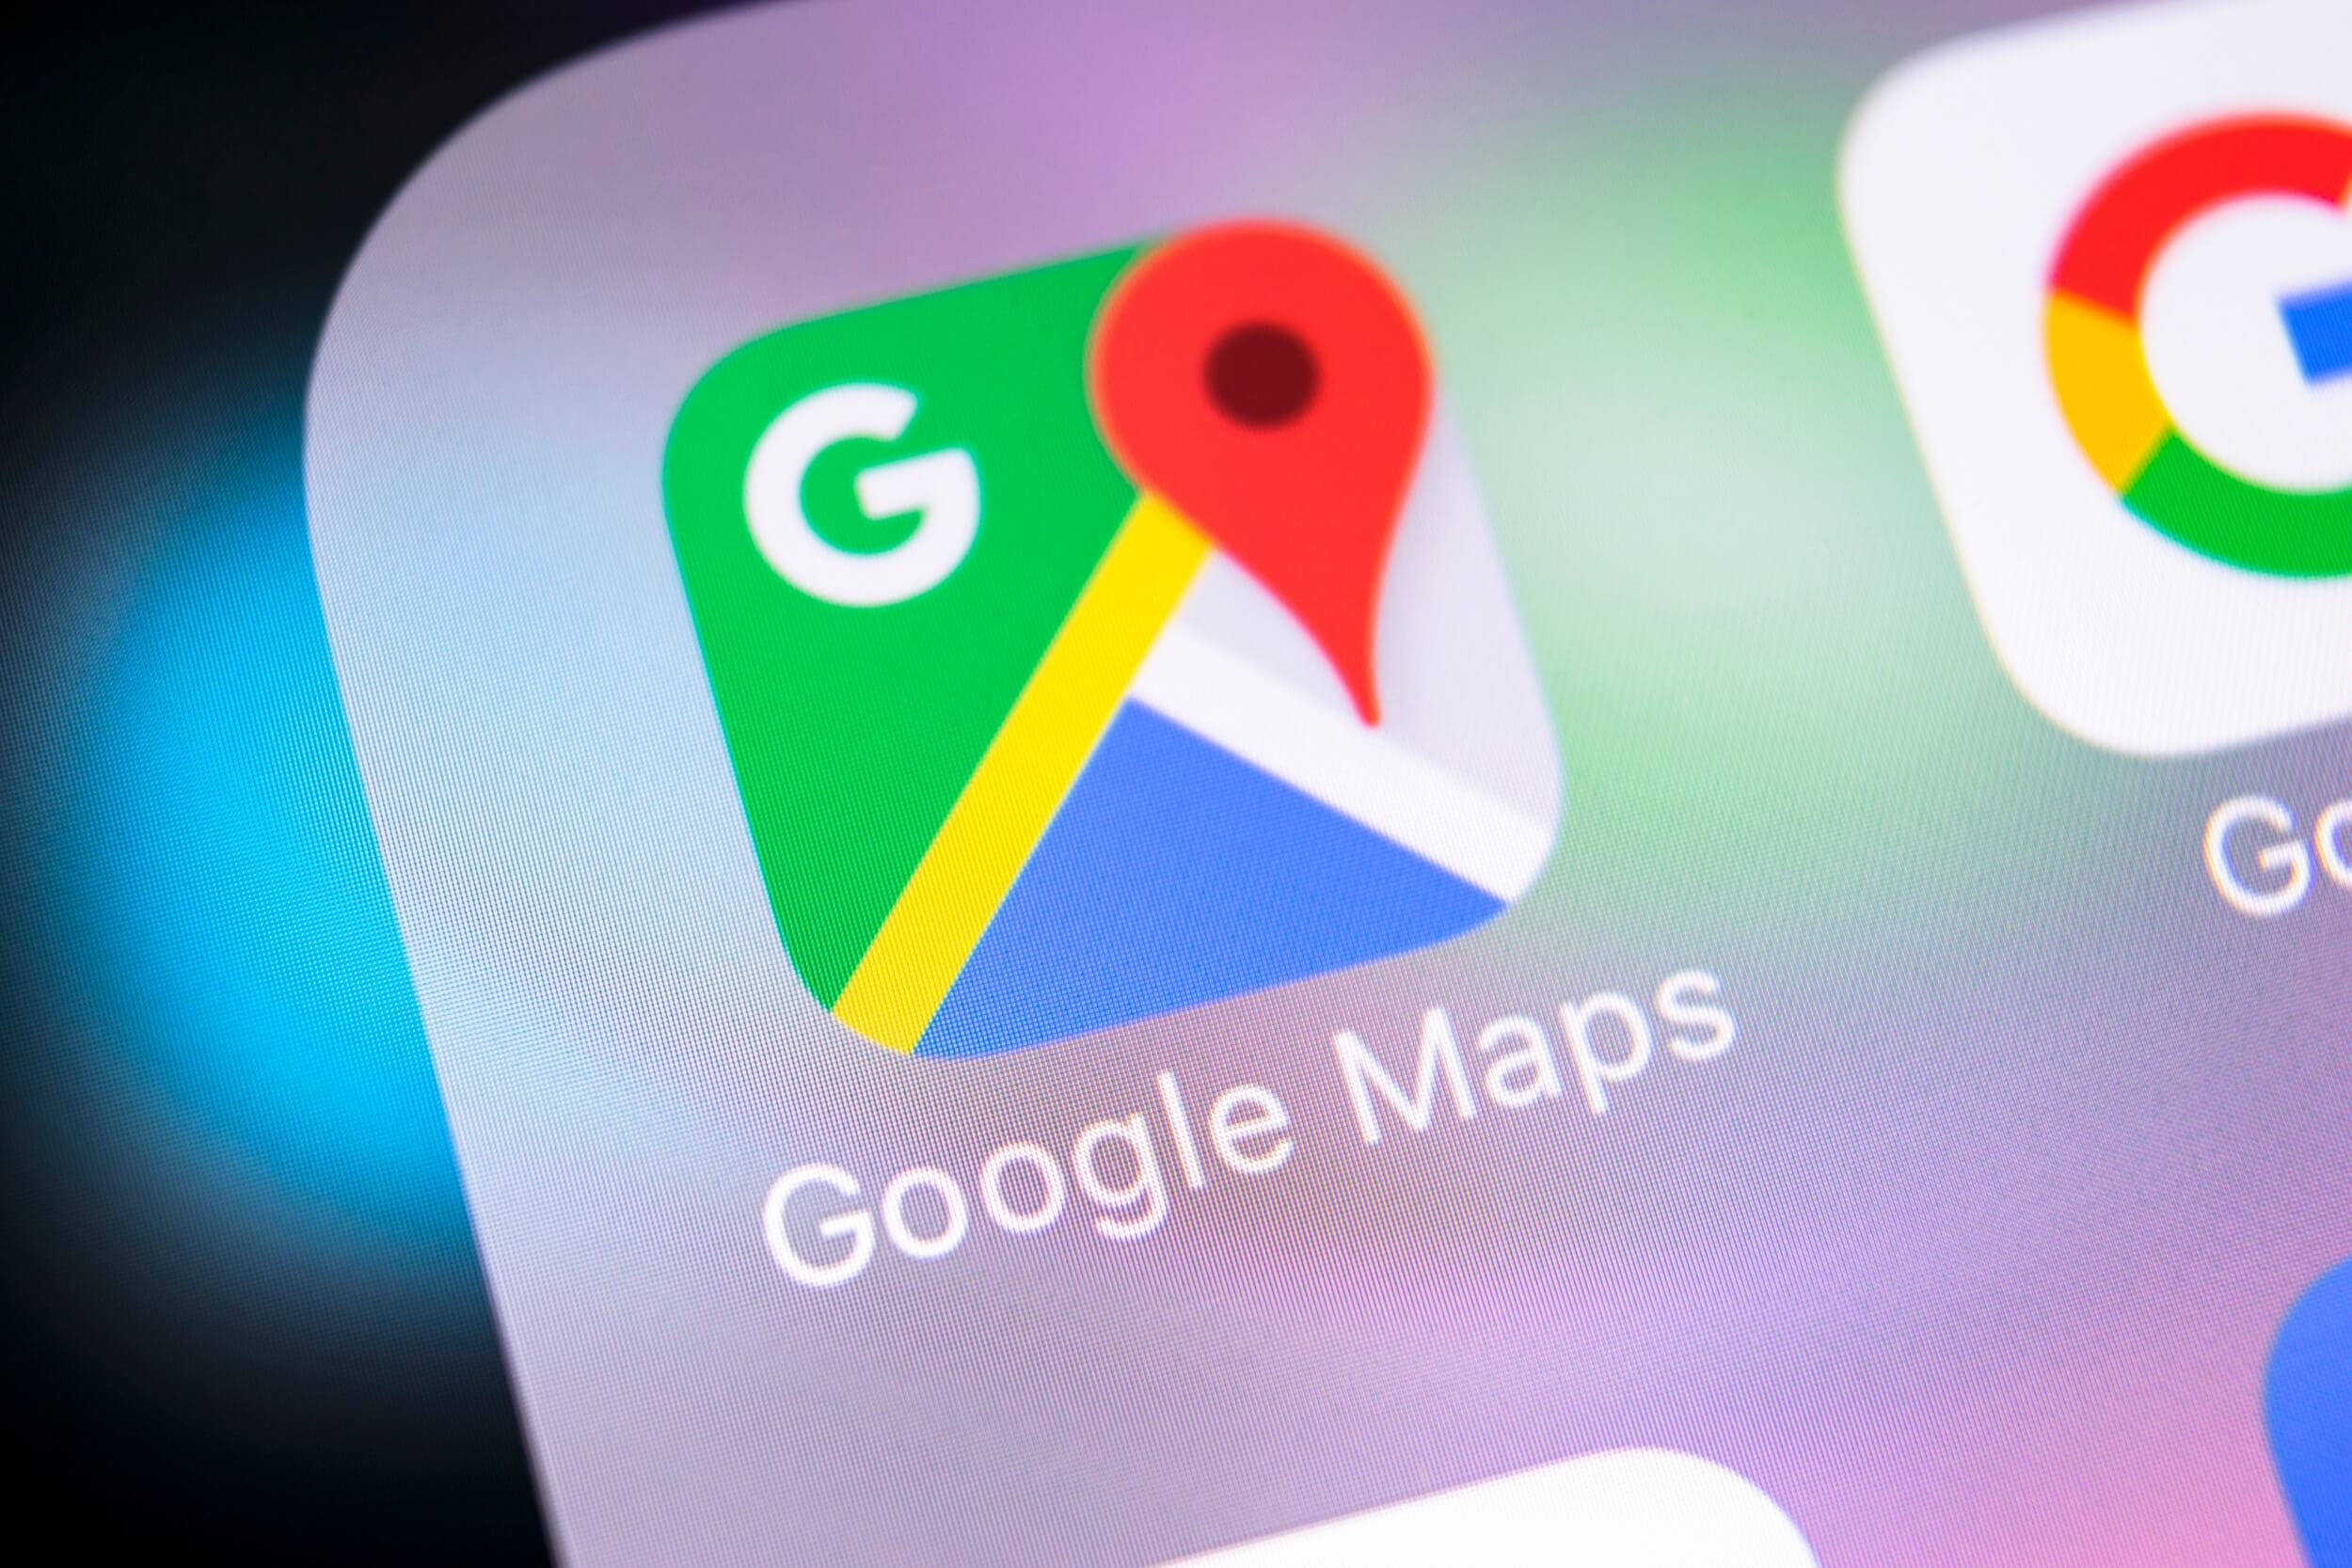 Google Maps is getting more detailed and more colorful